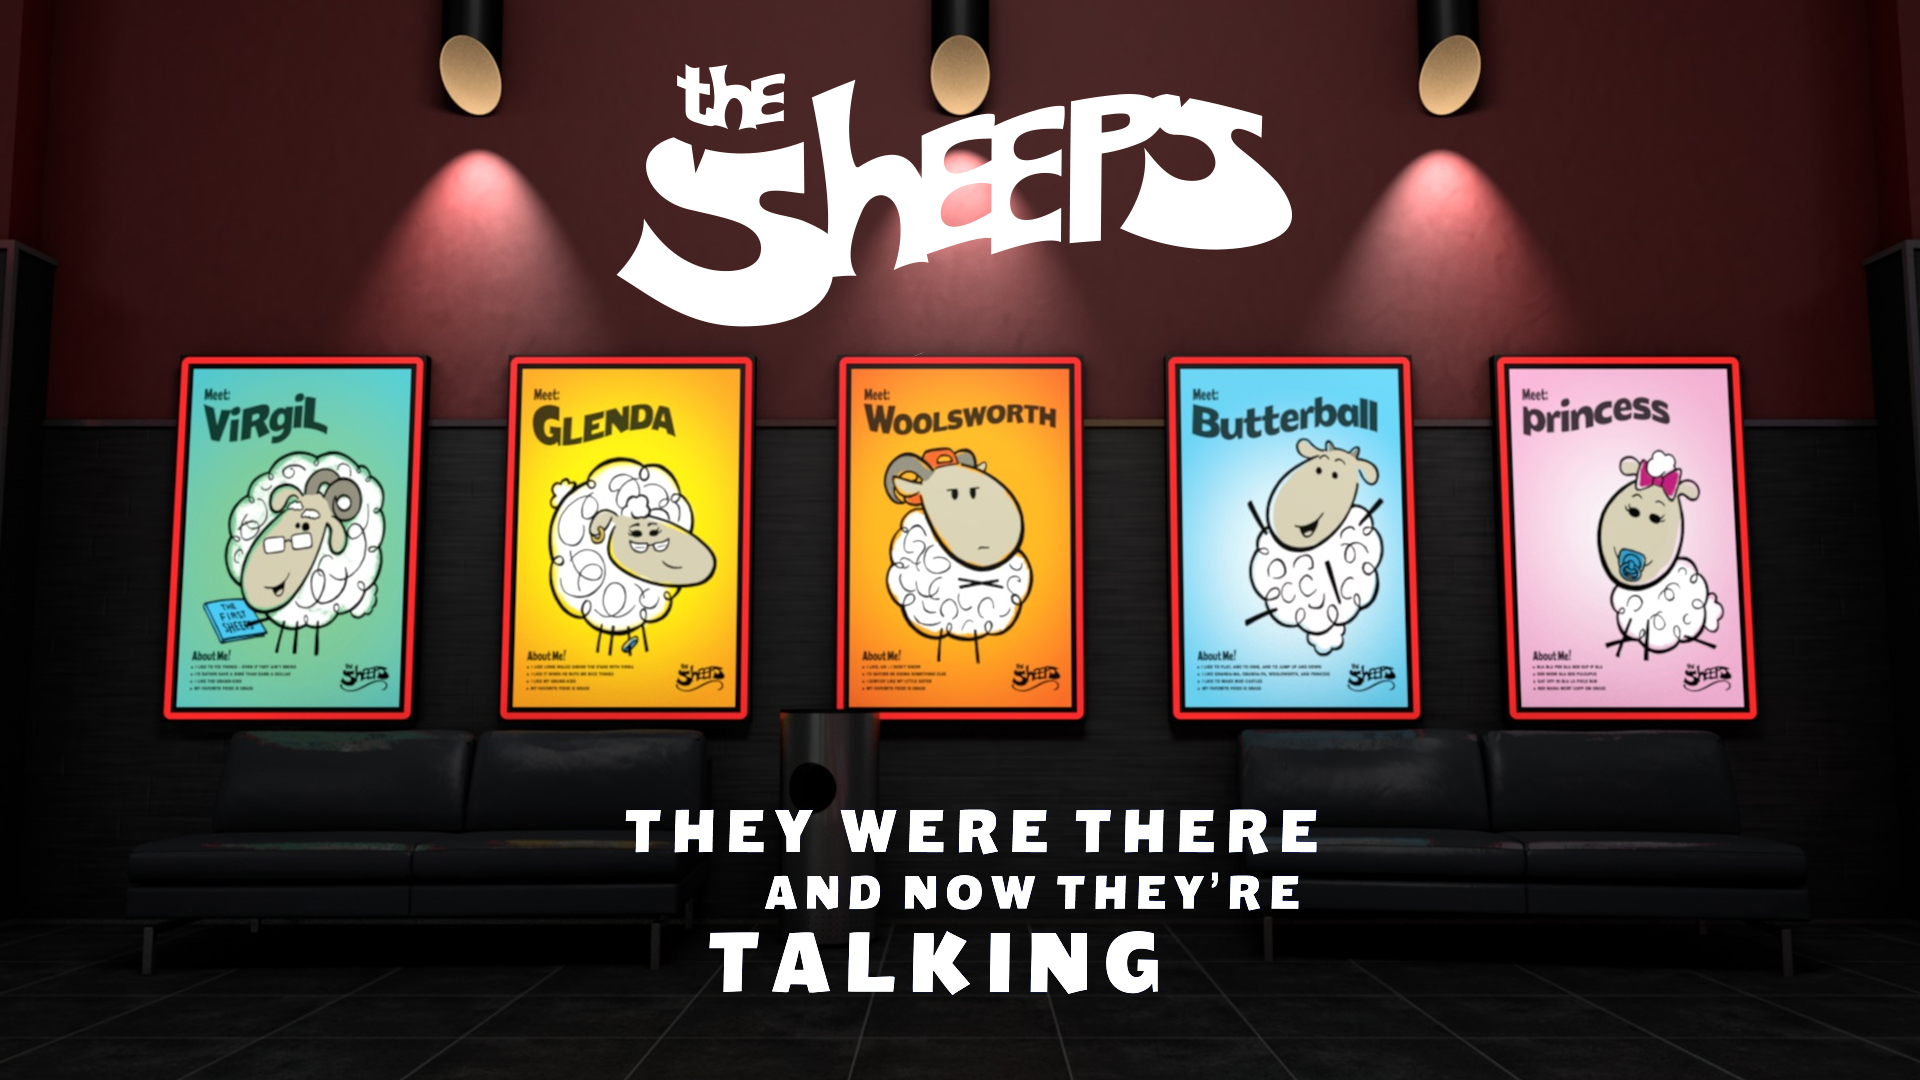 The Sheeps